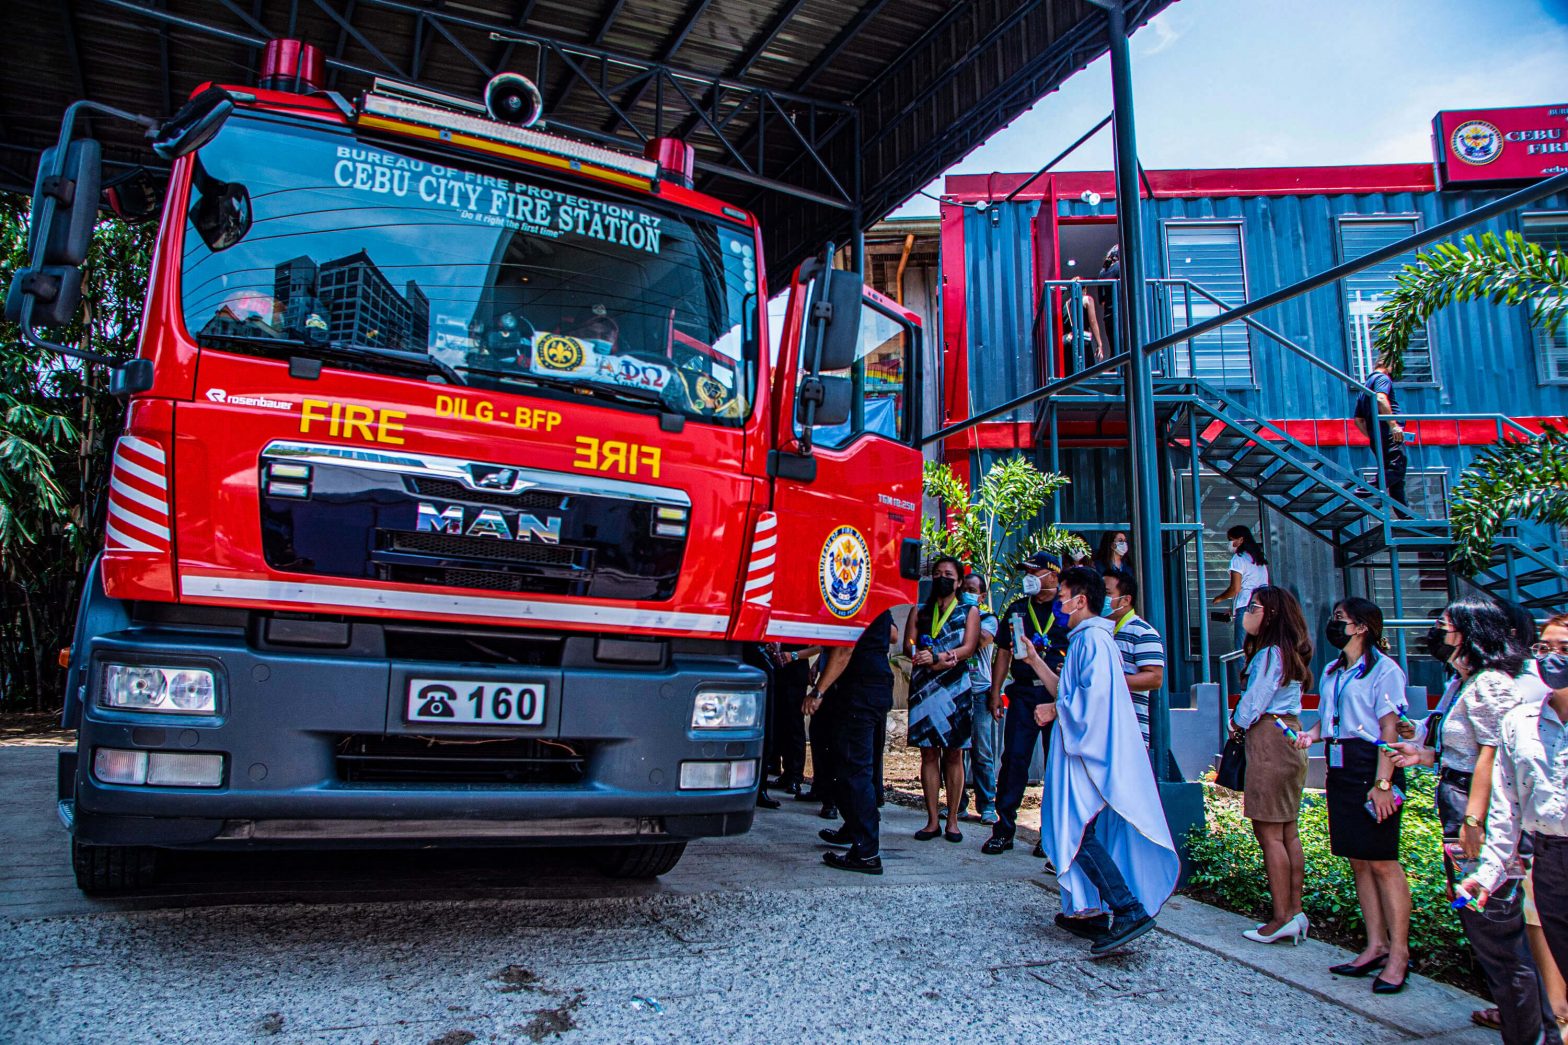 New fire substation opens at Cebu Business Park